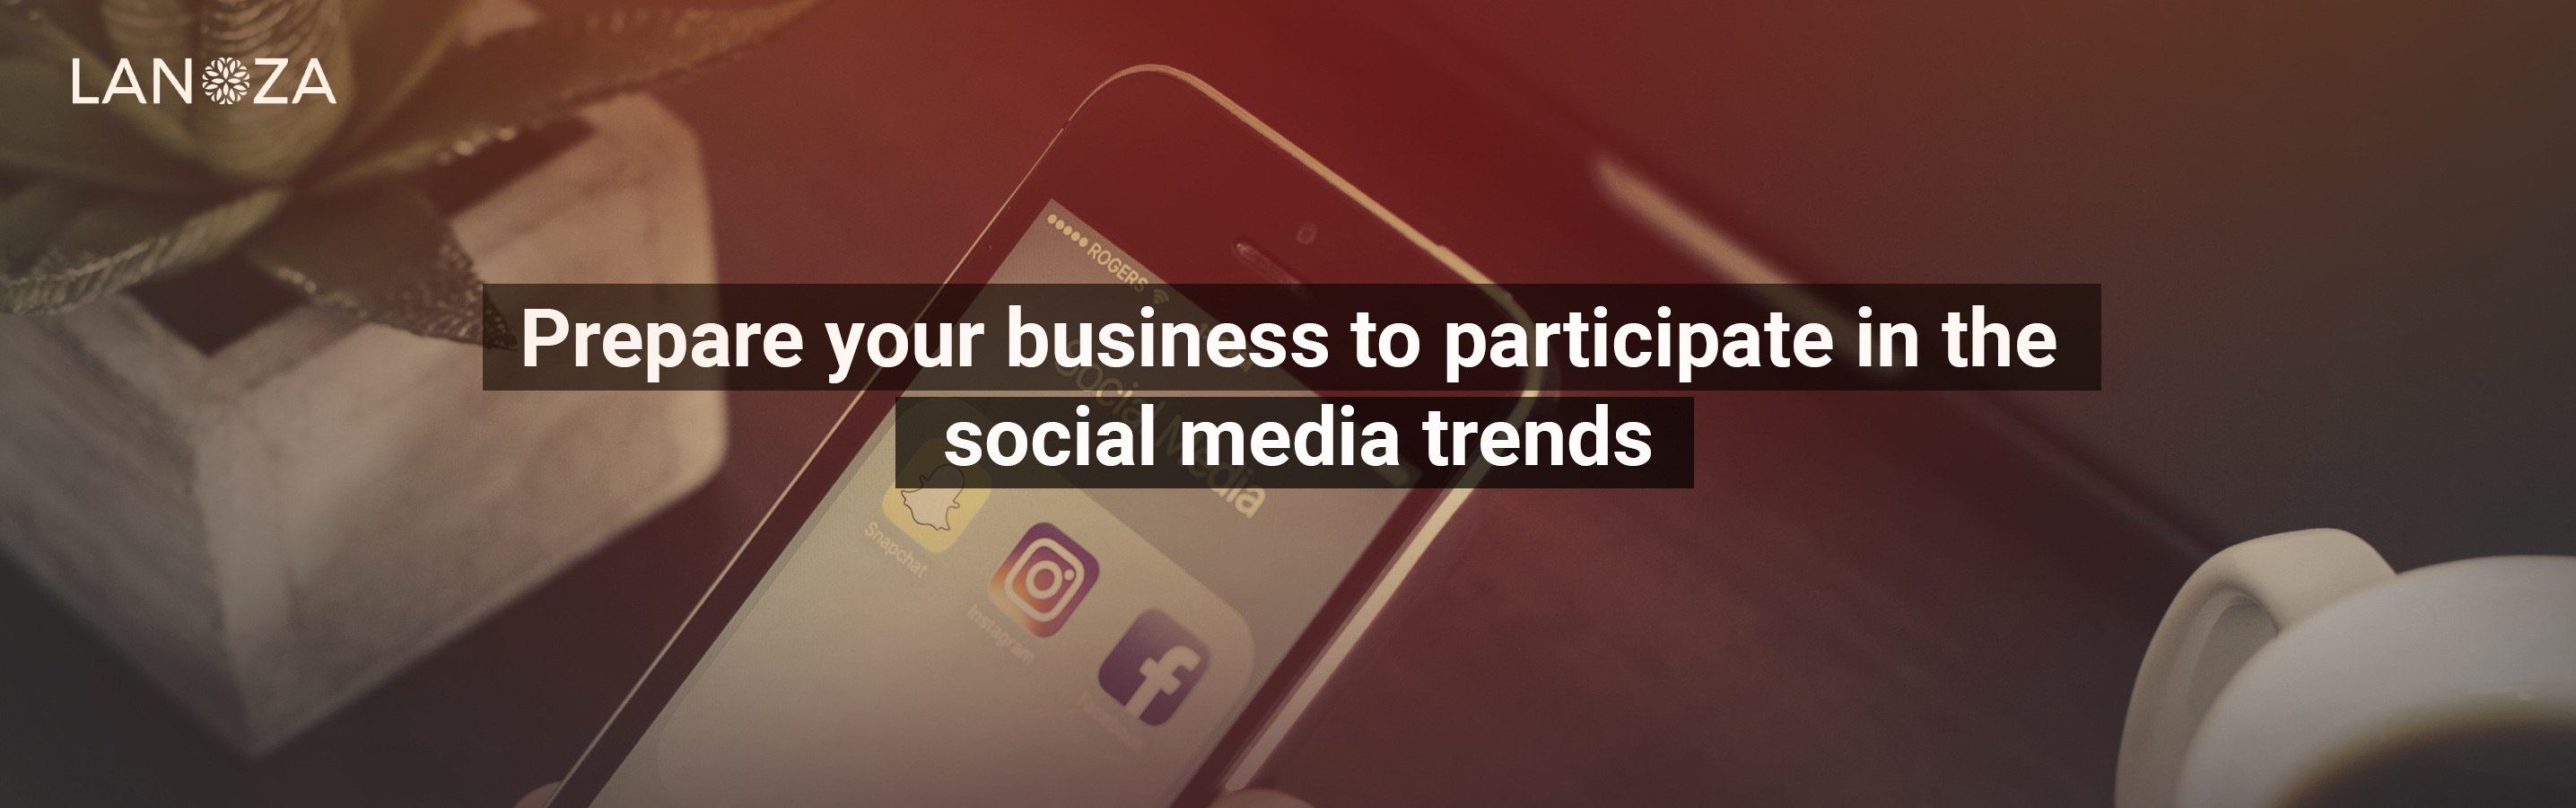 prepare-your-business-to-participate-in-the-social-media-trends